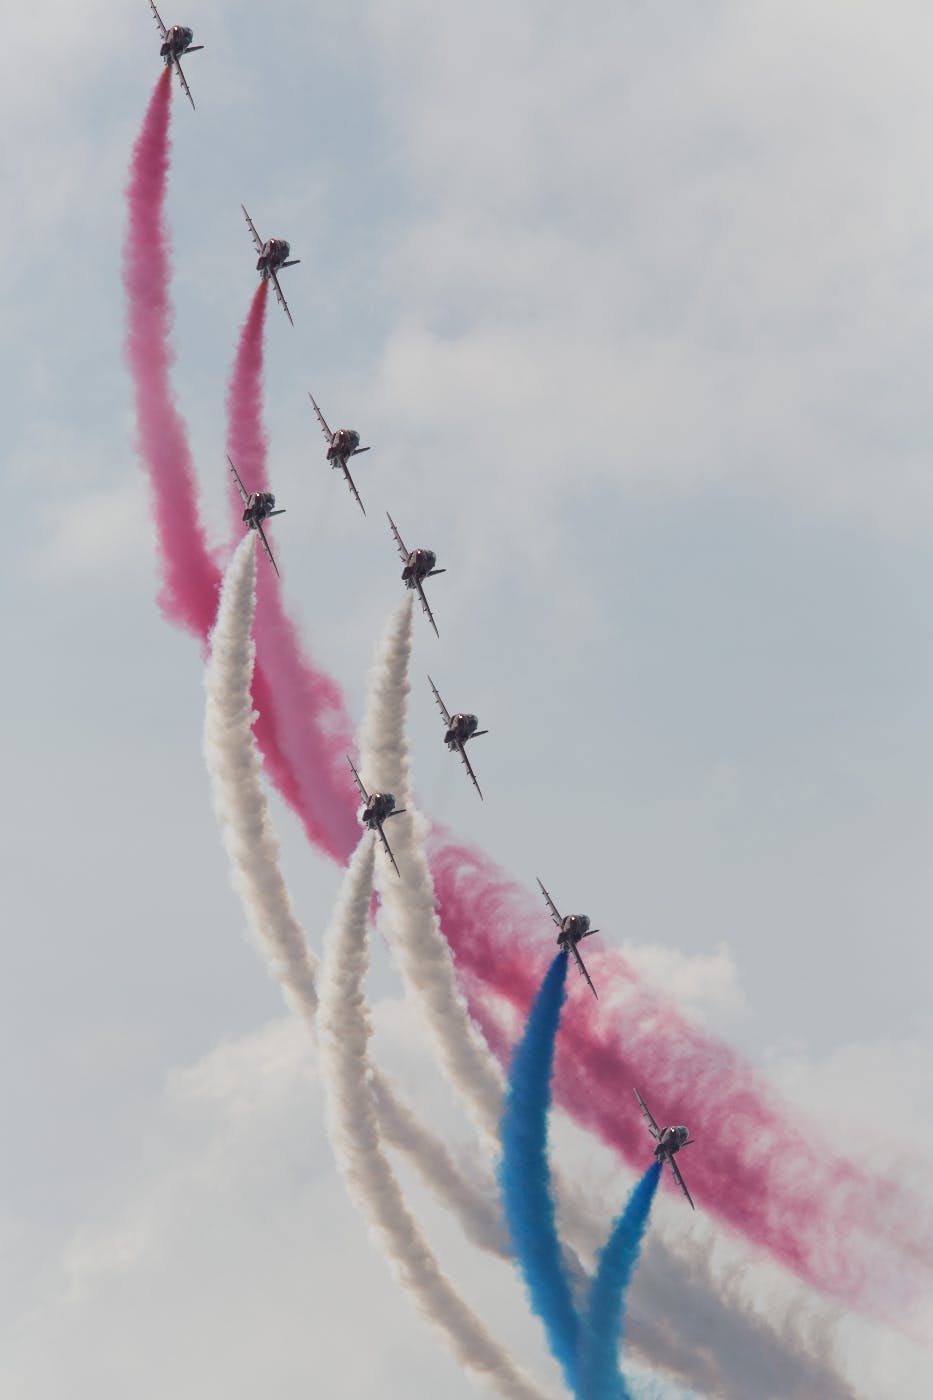 Blue Angels in formation with red, white and blue smoke